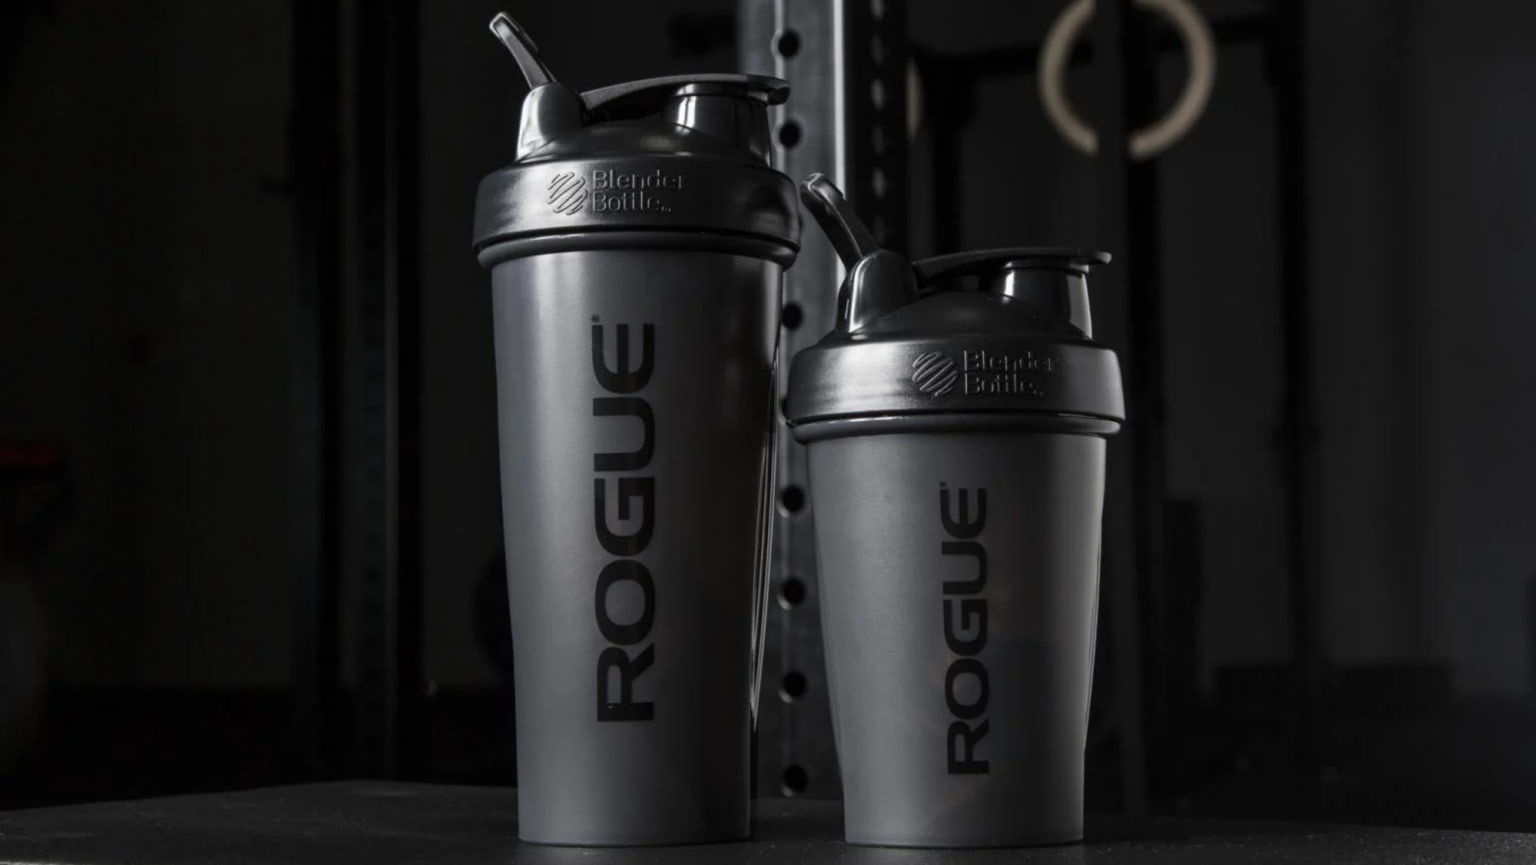 https://assets.roguefitness.com/f_auto,q_auto,c_limit,w_1536,b_rgb:f8f8f8/catalog/Gear%20and%20Accessories/Accessories/Shakers%20and%20Bottles/BB00V20/BB00V20-H_kawrih.png